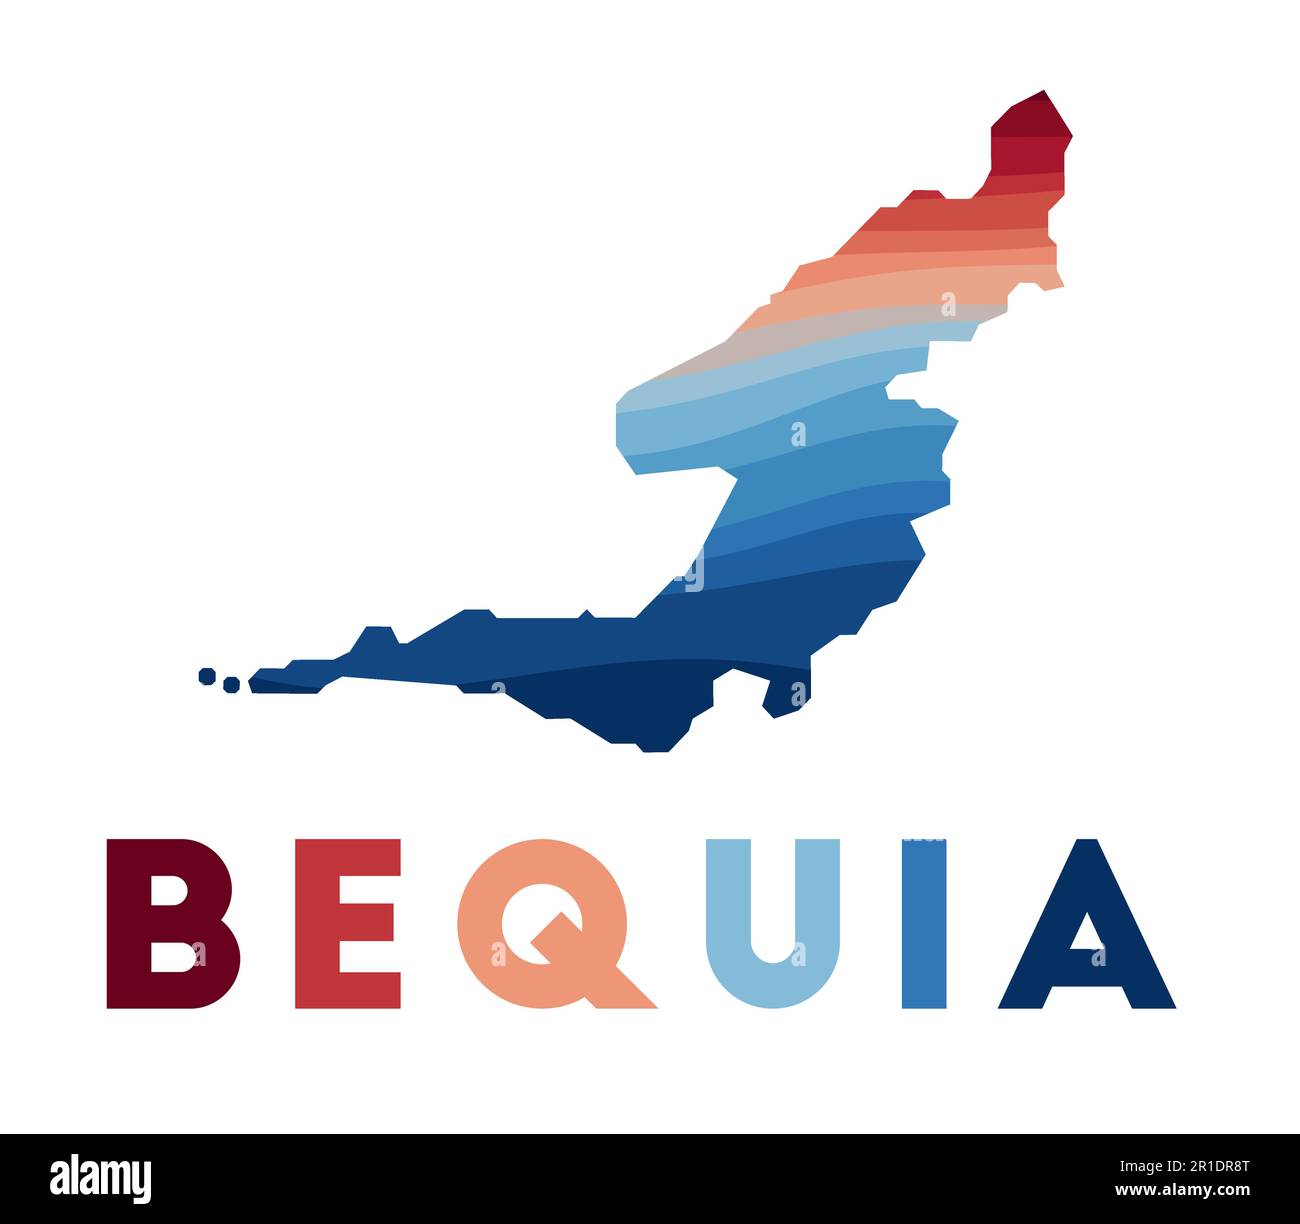 Bequia map. Map of the island with beautiful geometric waves in red ...